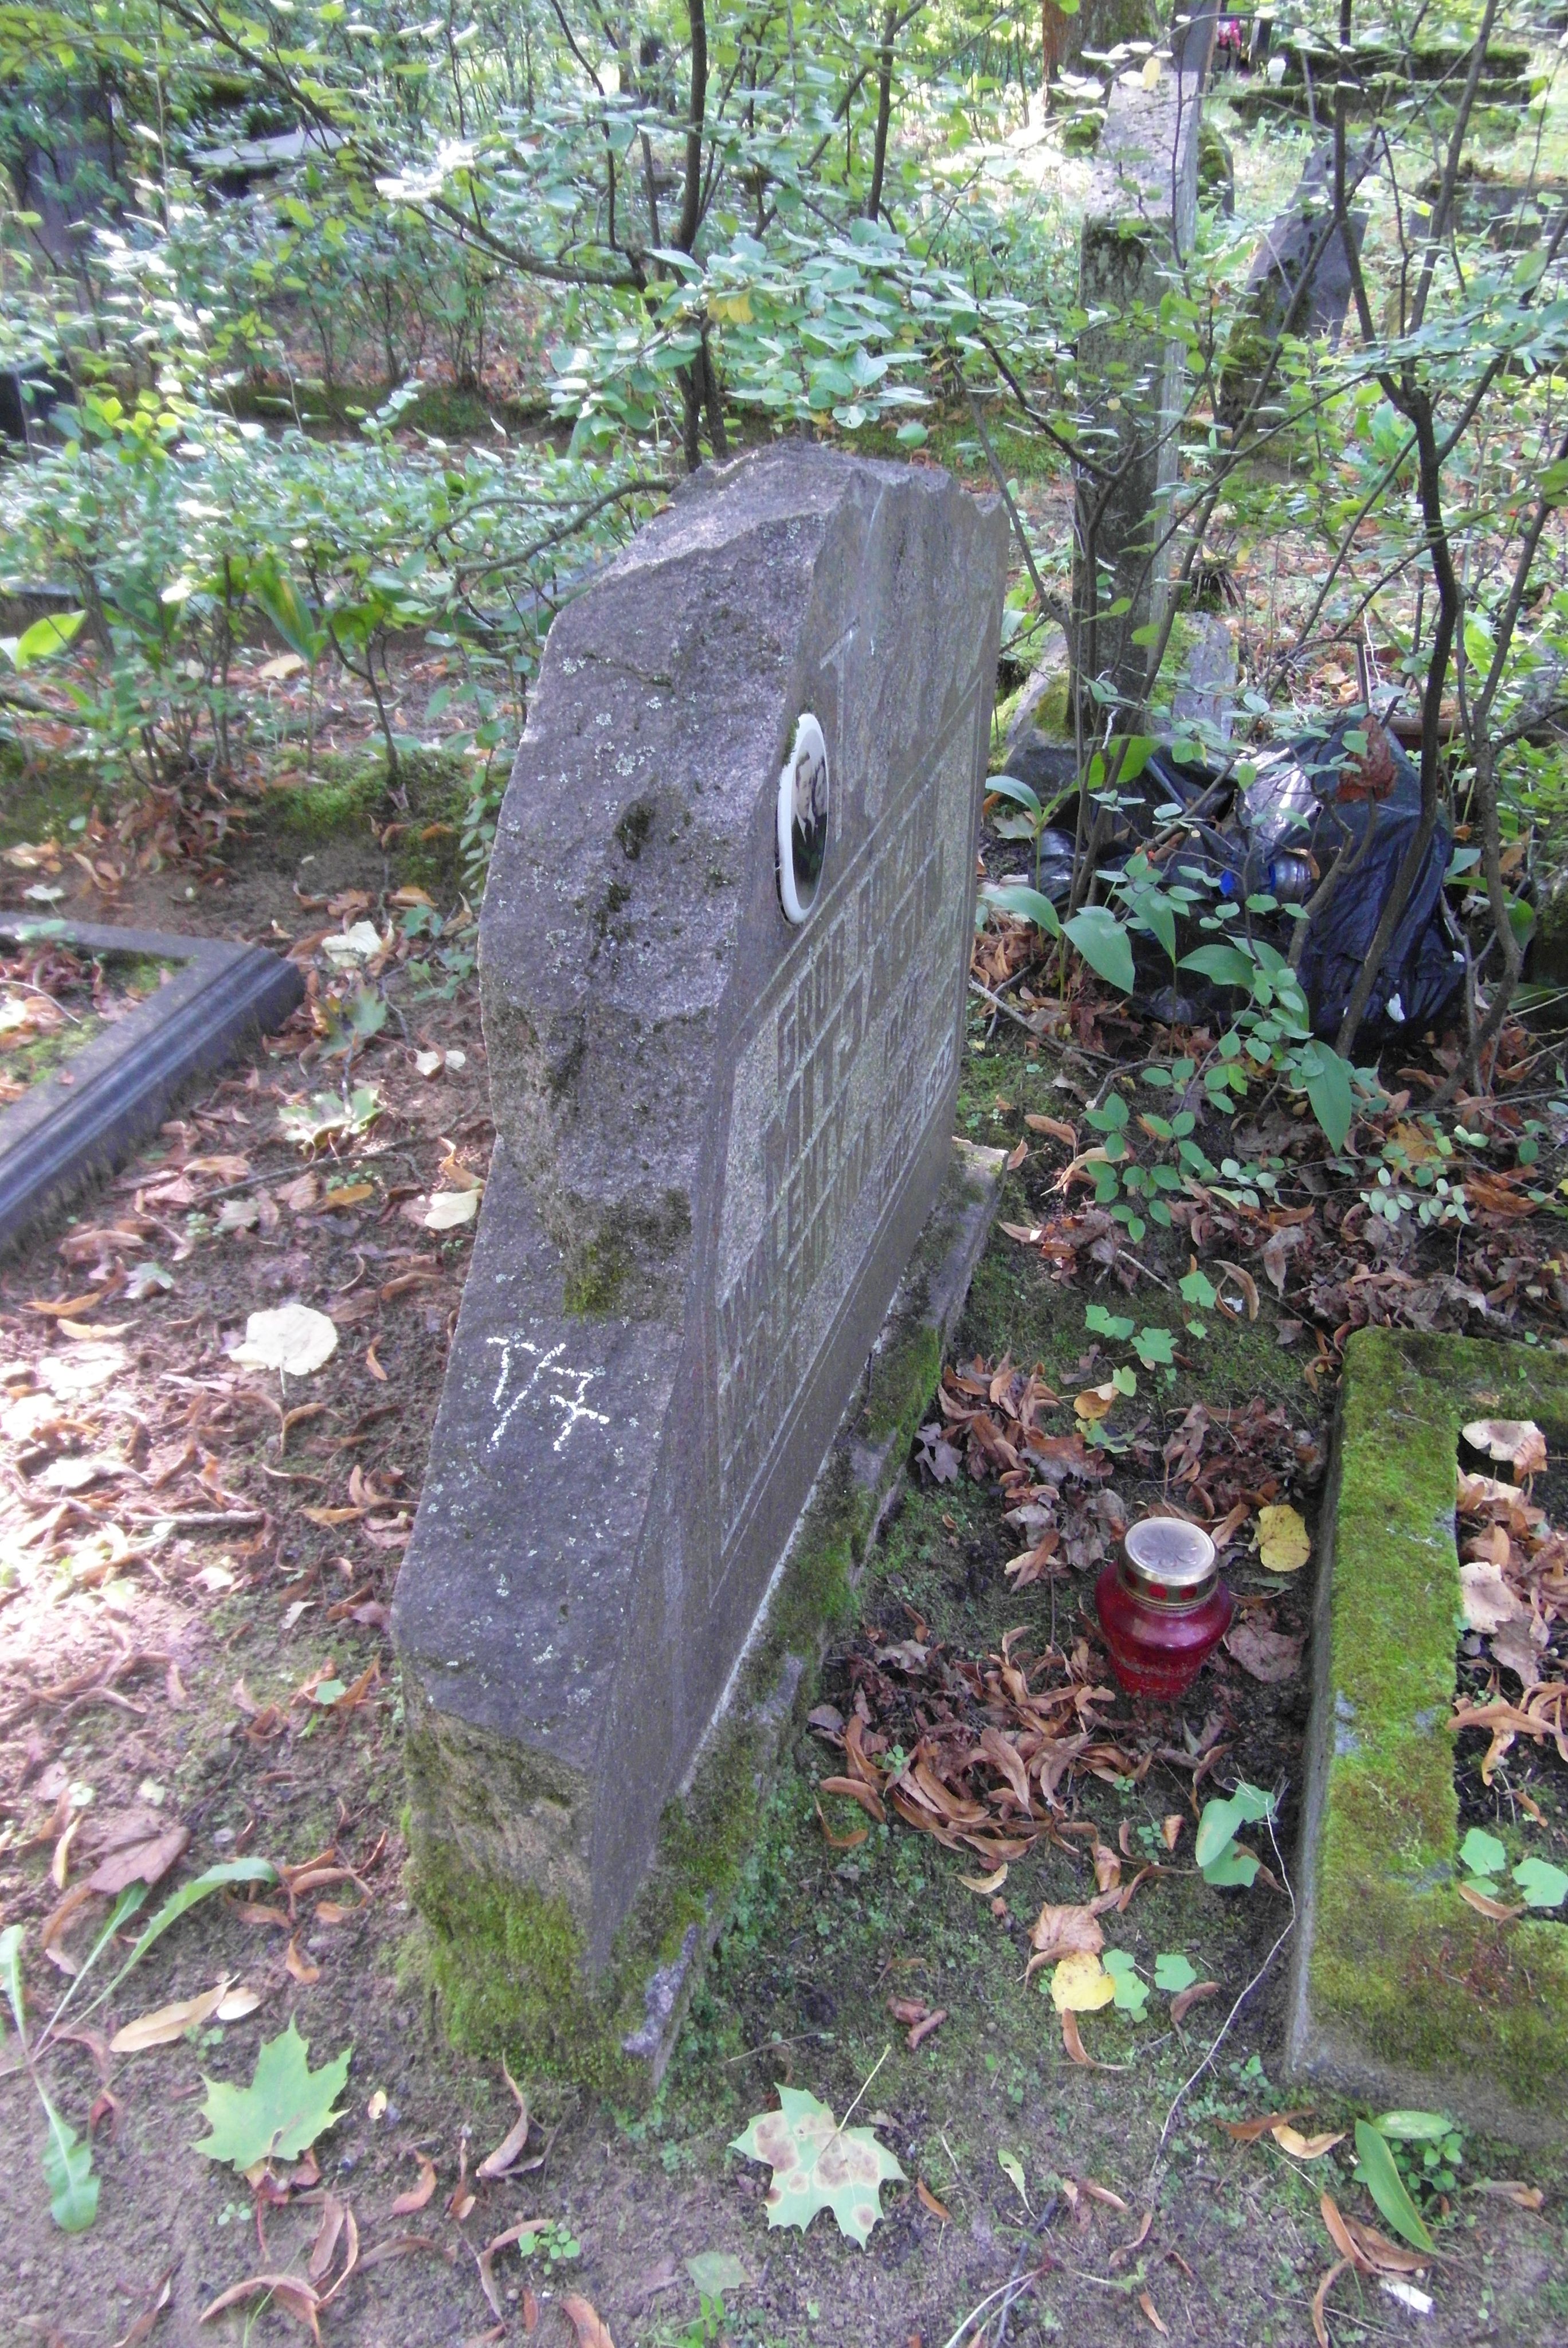 Mitjagin family tombstone, St Michael's cemetery in Riga, as of 2021.